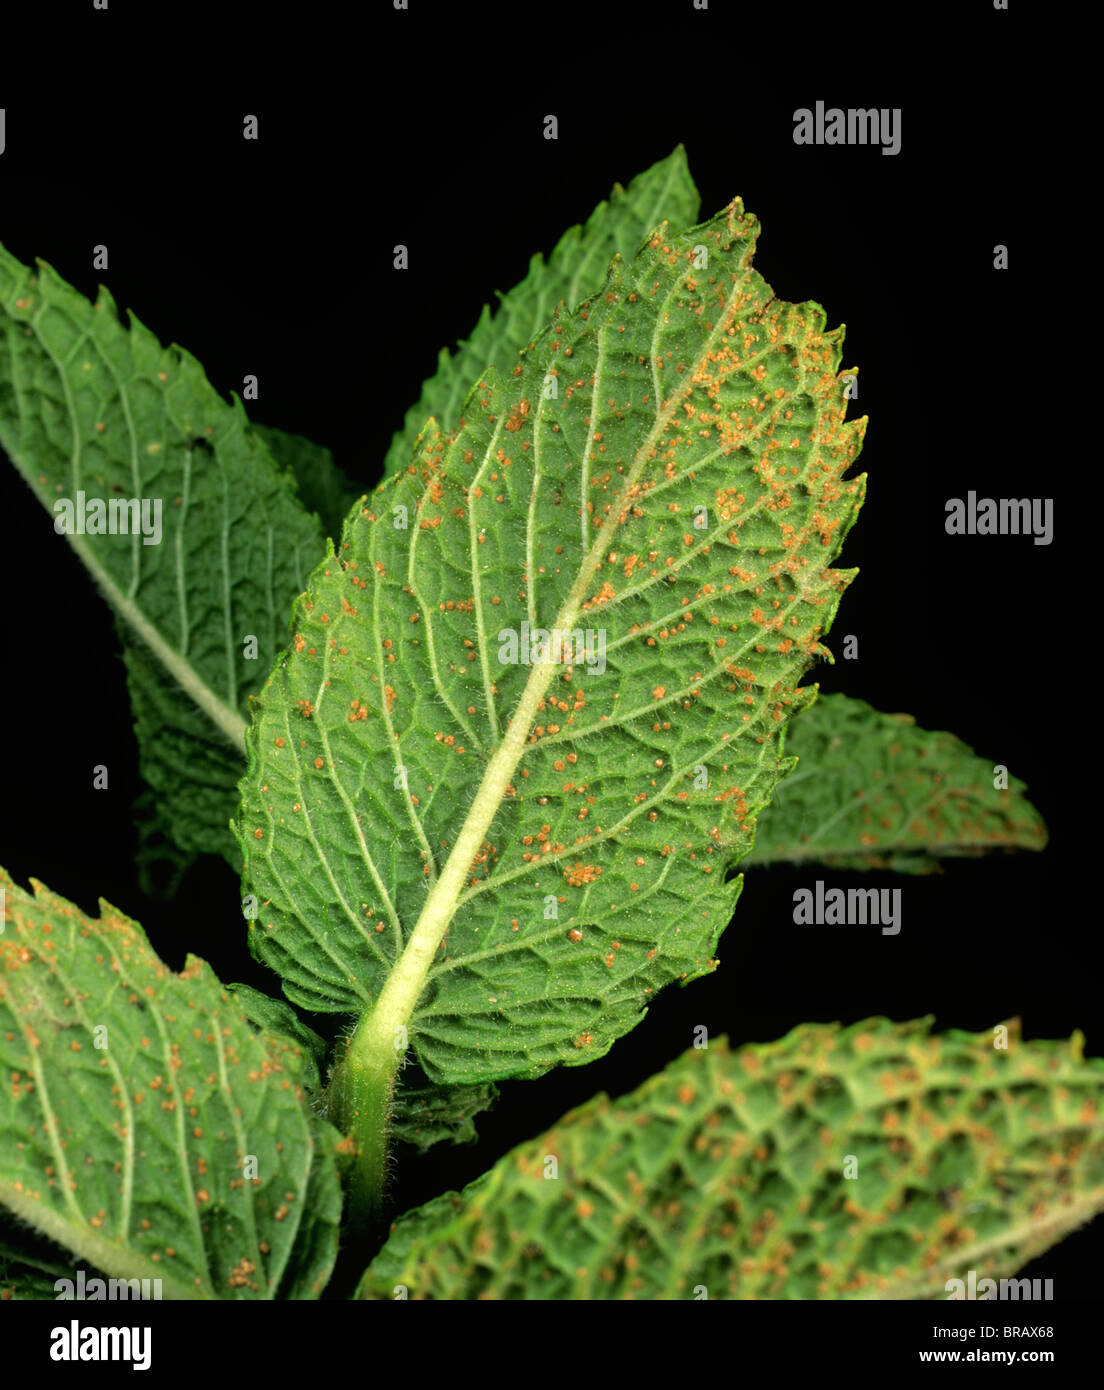 Mint rust (Puccinia menthae) on peppermint plants leaves Stock Photo